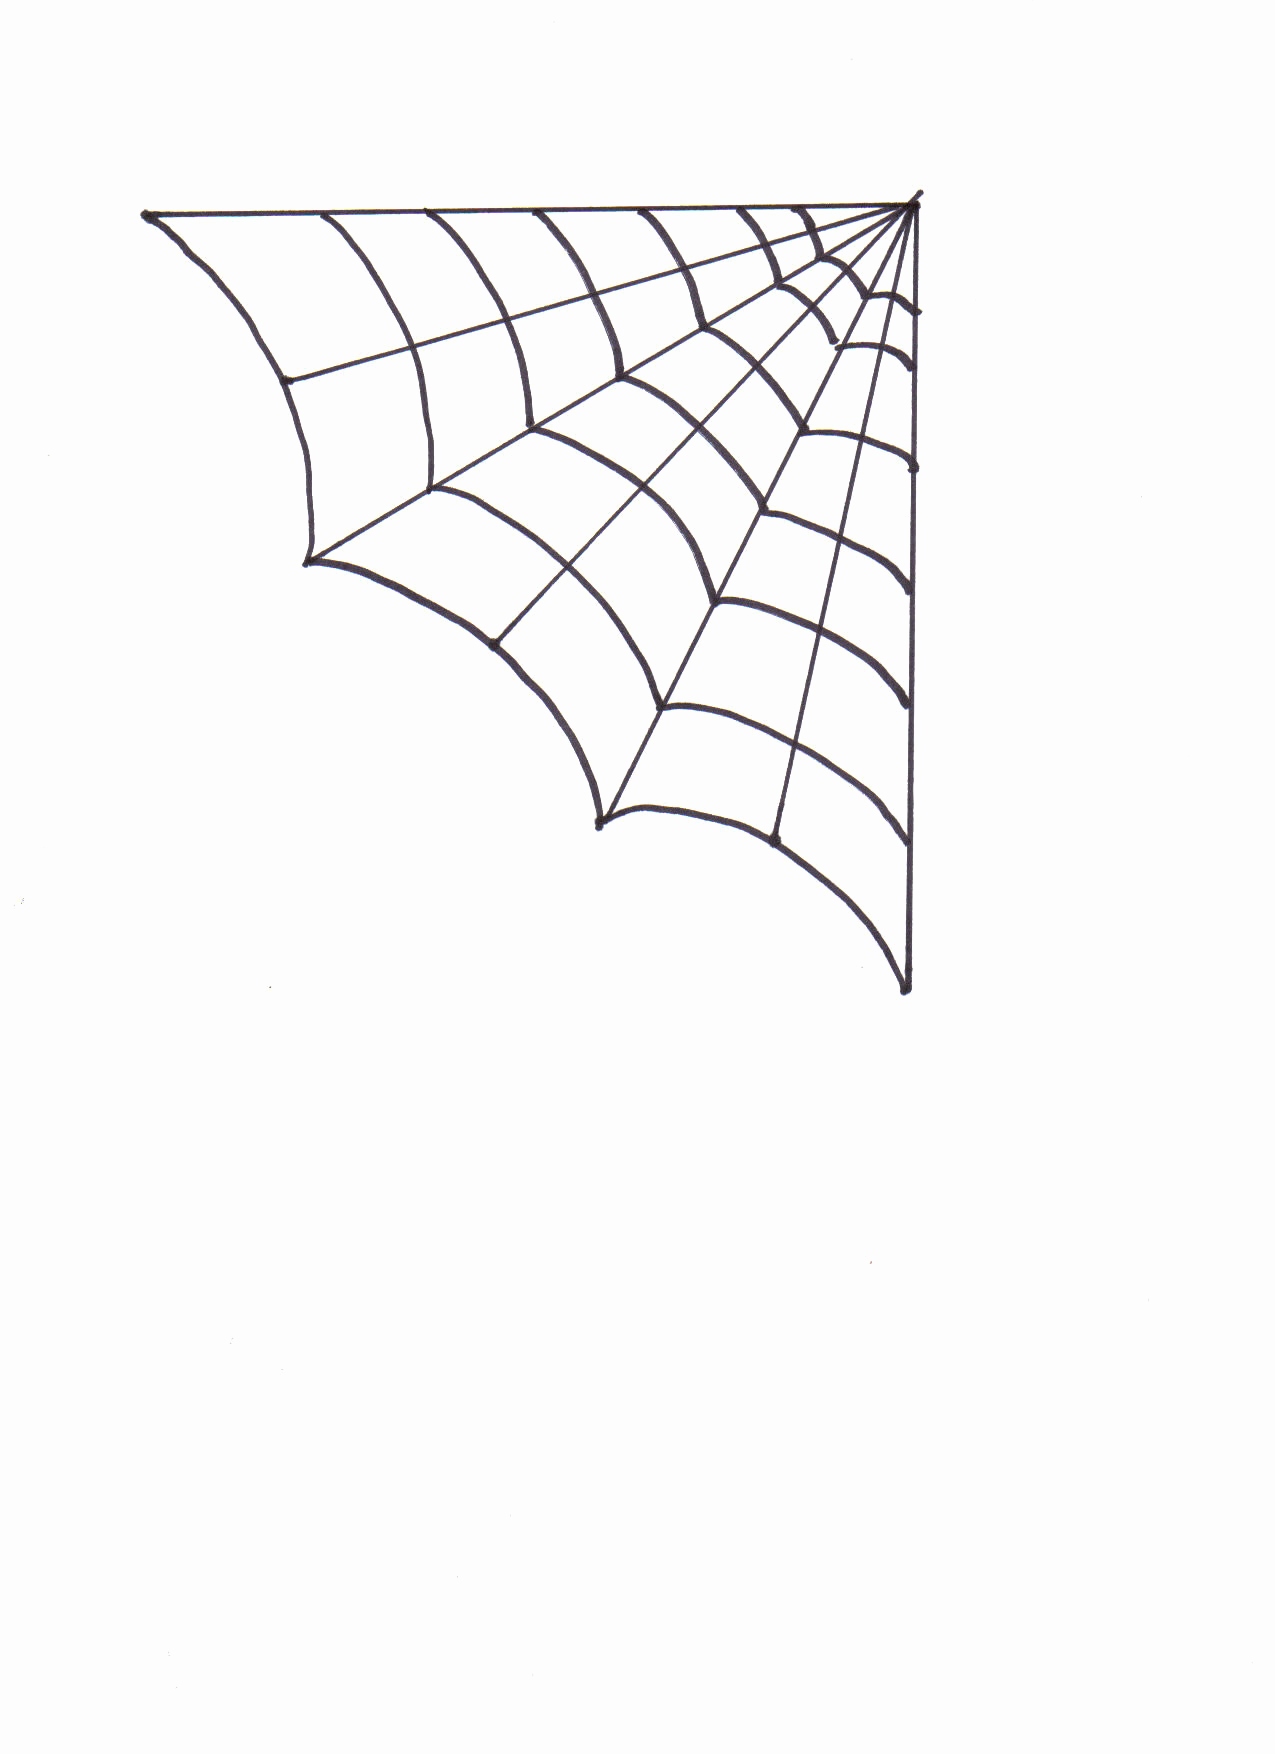 Spider Web Coloring Page at GetColorings.com | Free printable colorings